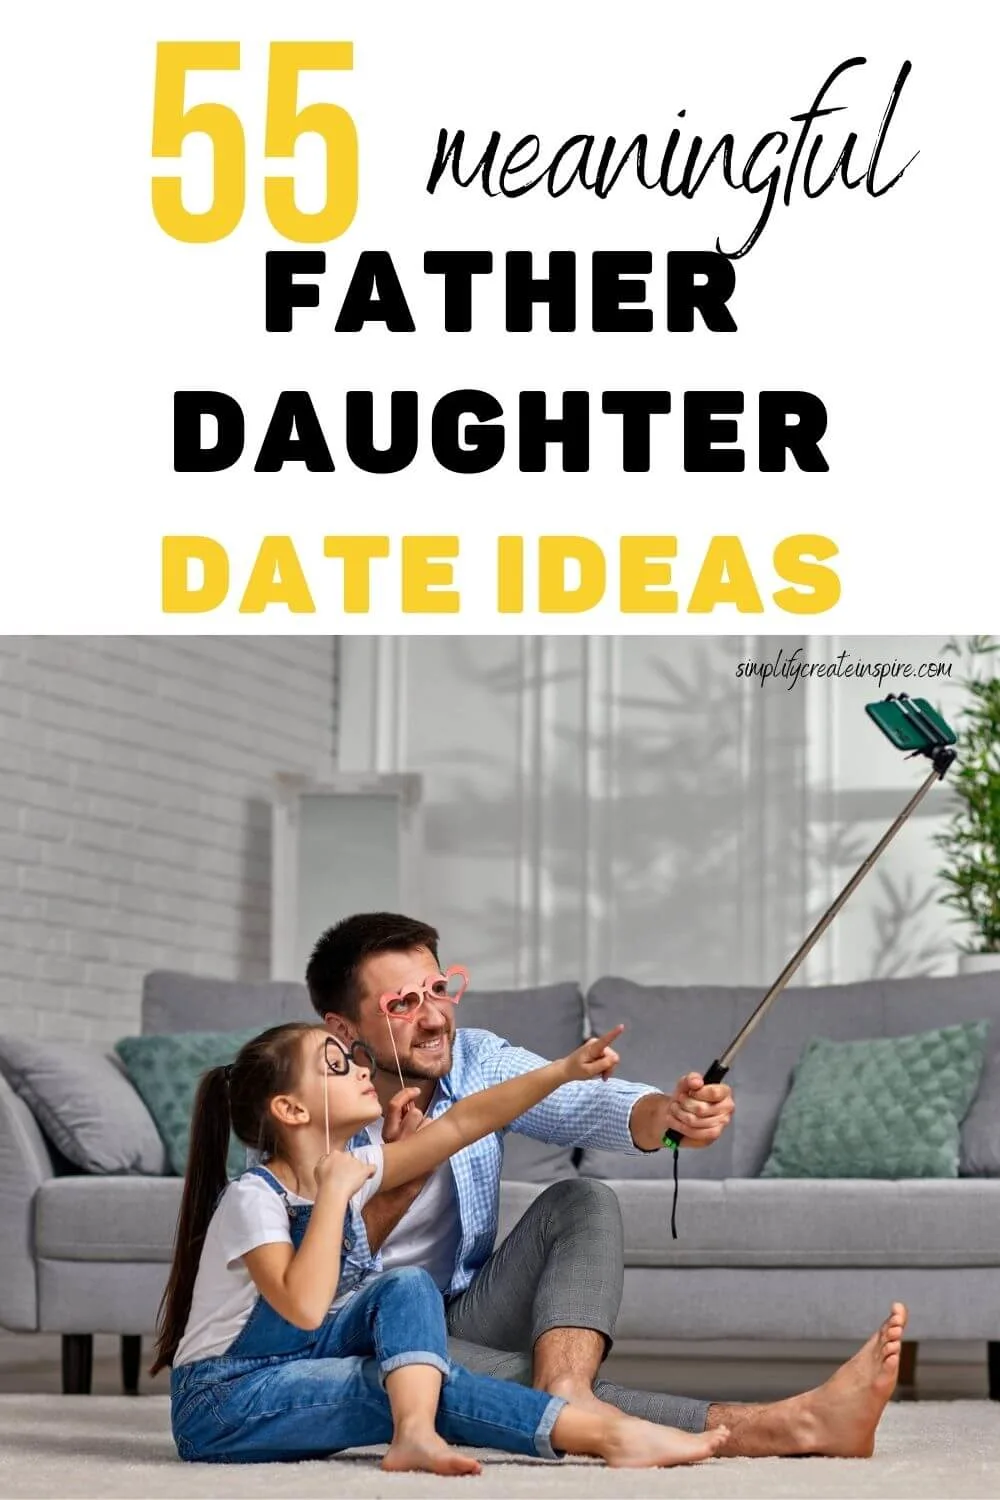 Pinterest image daddy-daughter date ideas